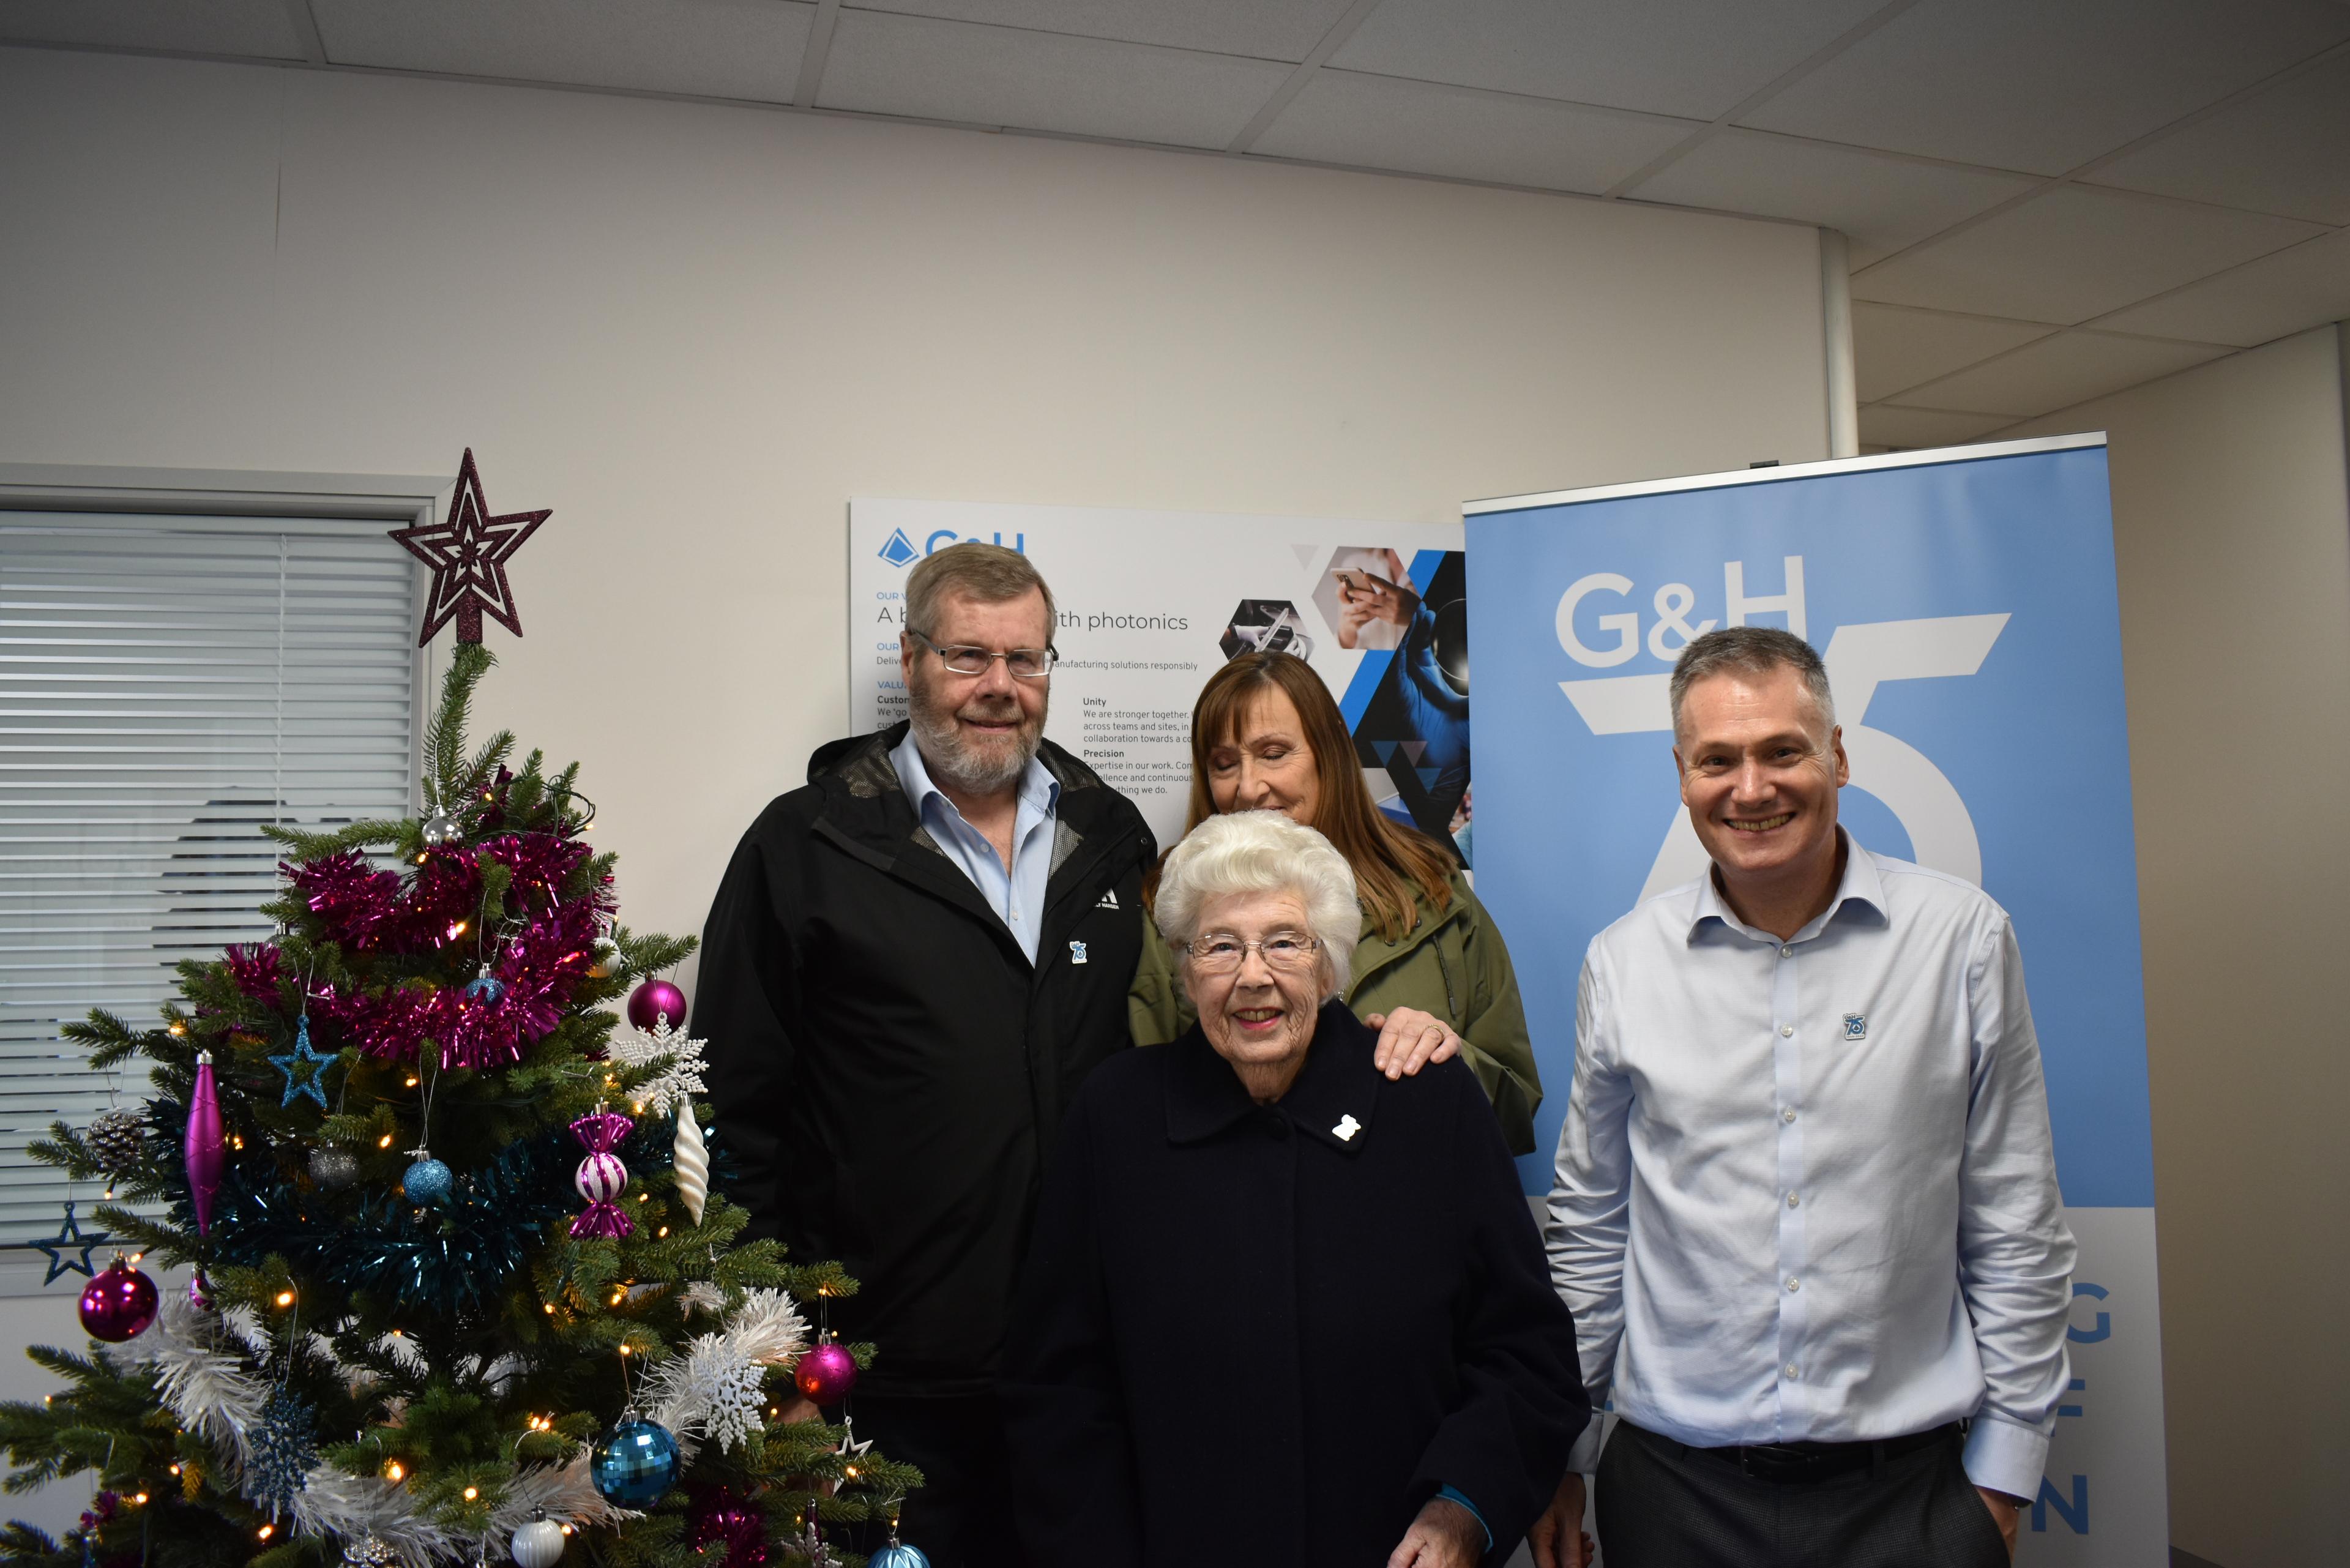 Norma Knapp (Centre) & family with Toby Reid (Right), Product Management Director, G&H Torquay